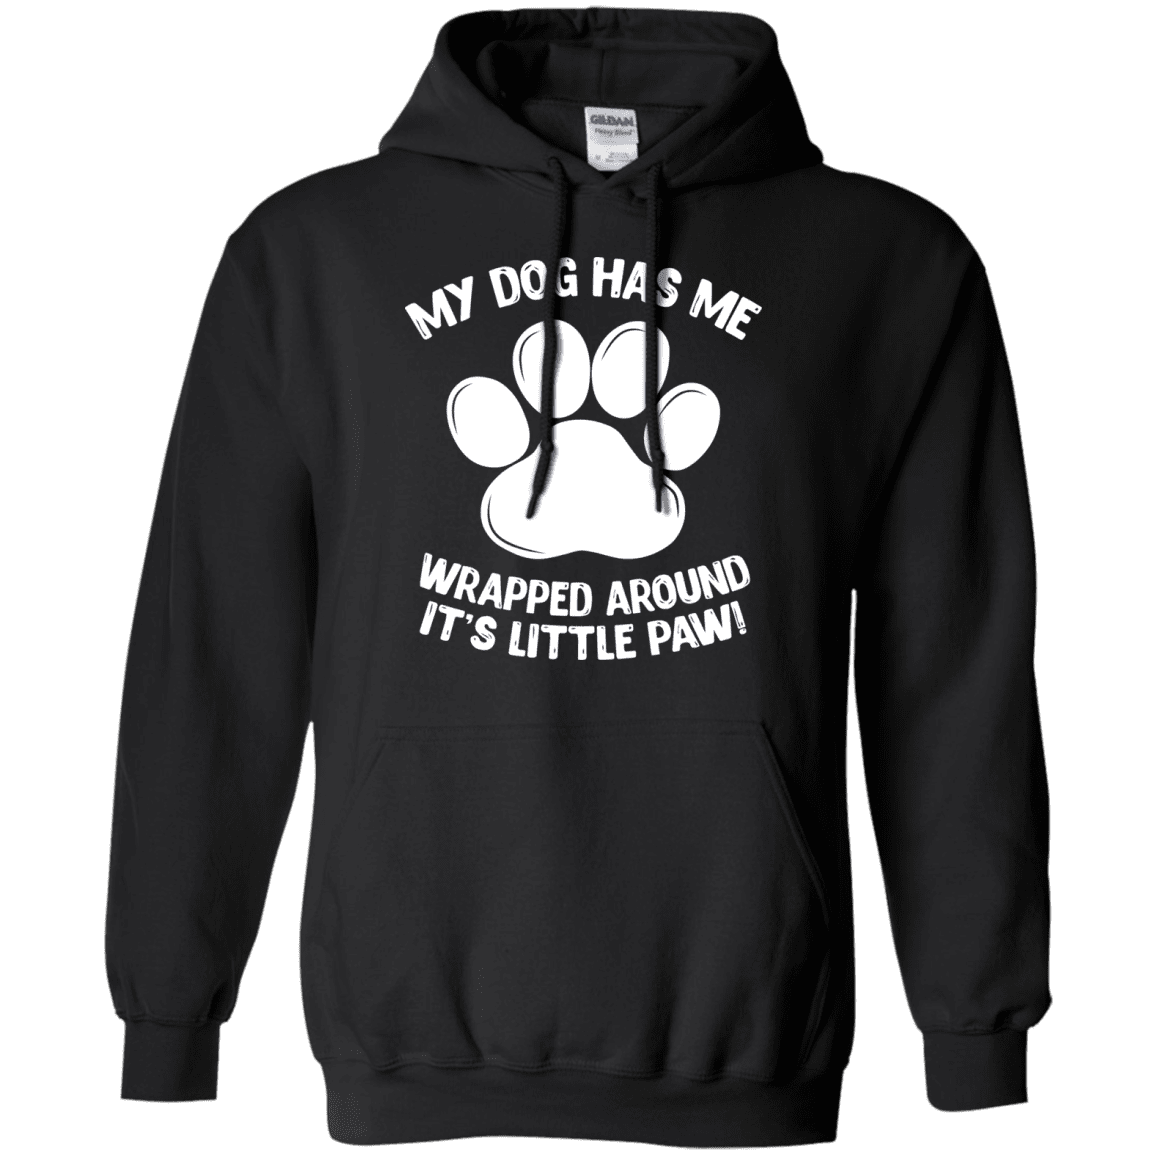 My Dog Has Me Wrapped Around It's Little Paw - Hoodie.